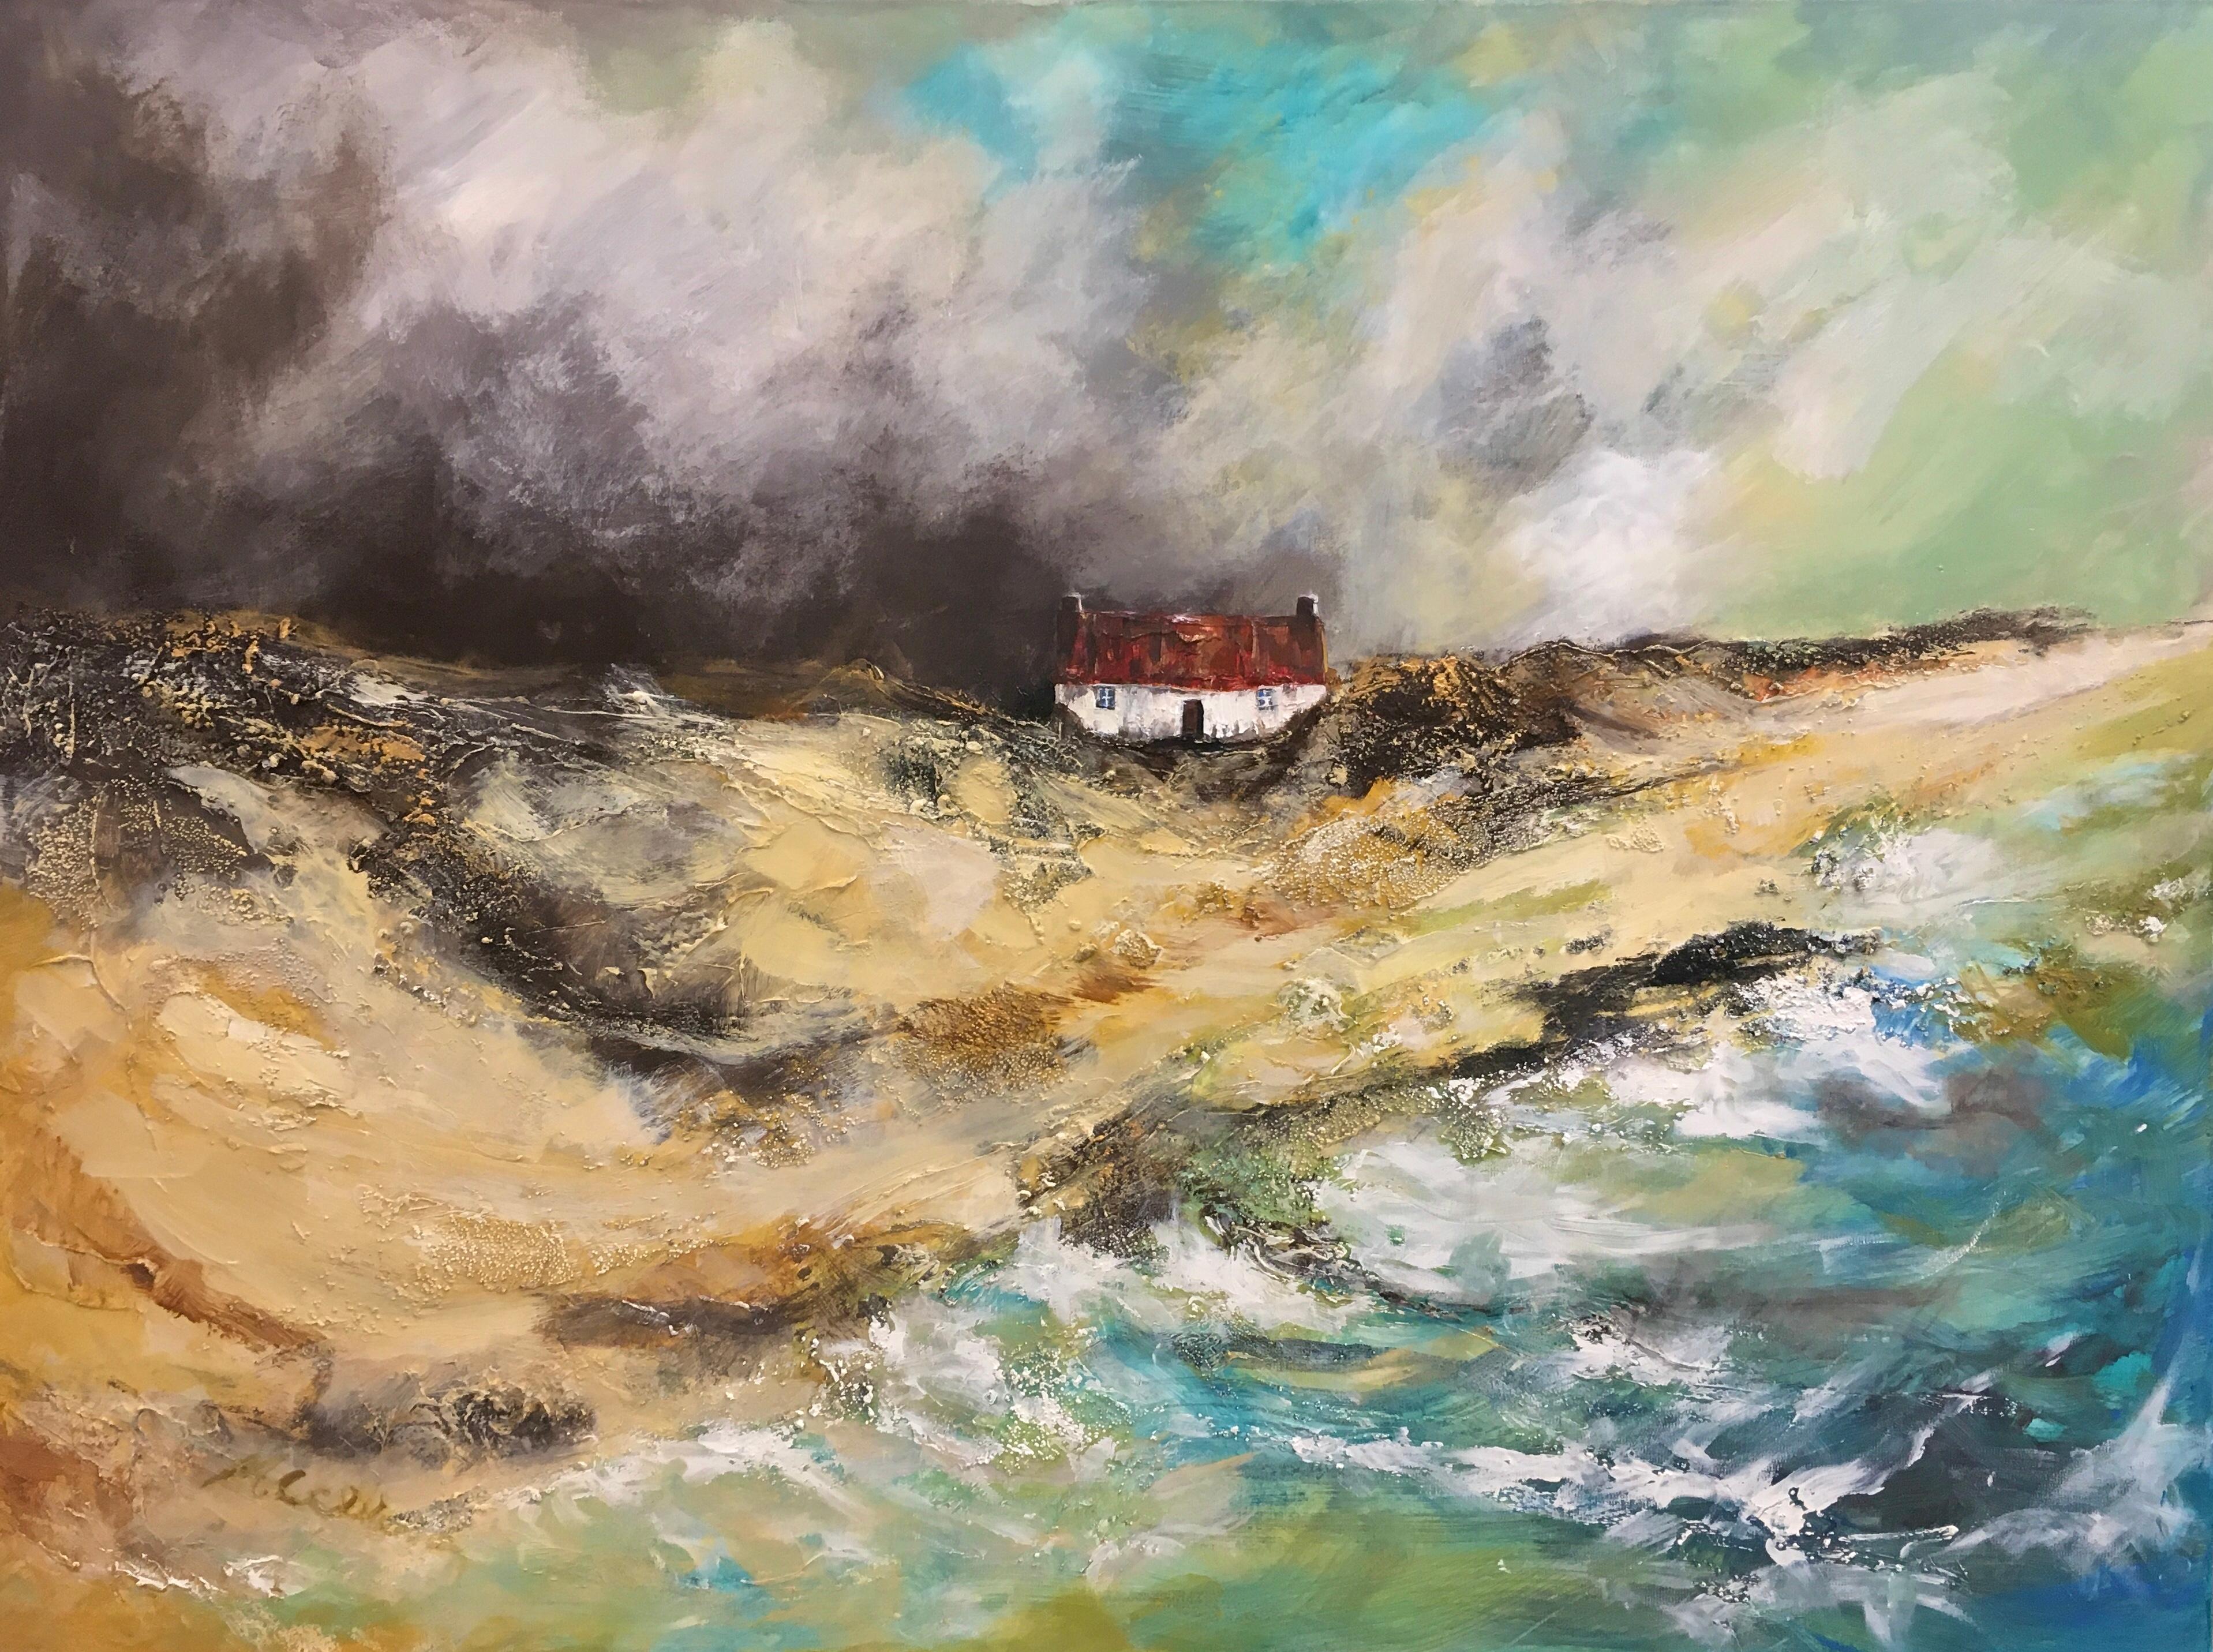 Kearvaig Bothy - Contemporary Seascape Painting by Mark McCallum